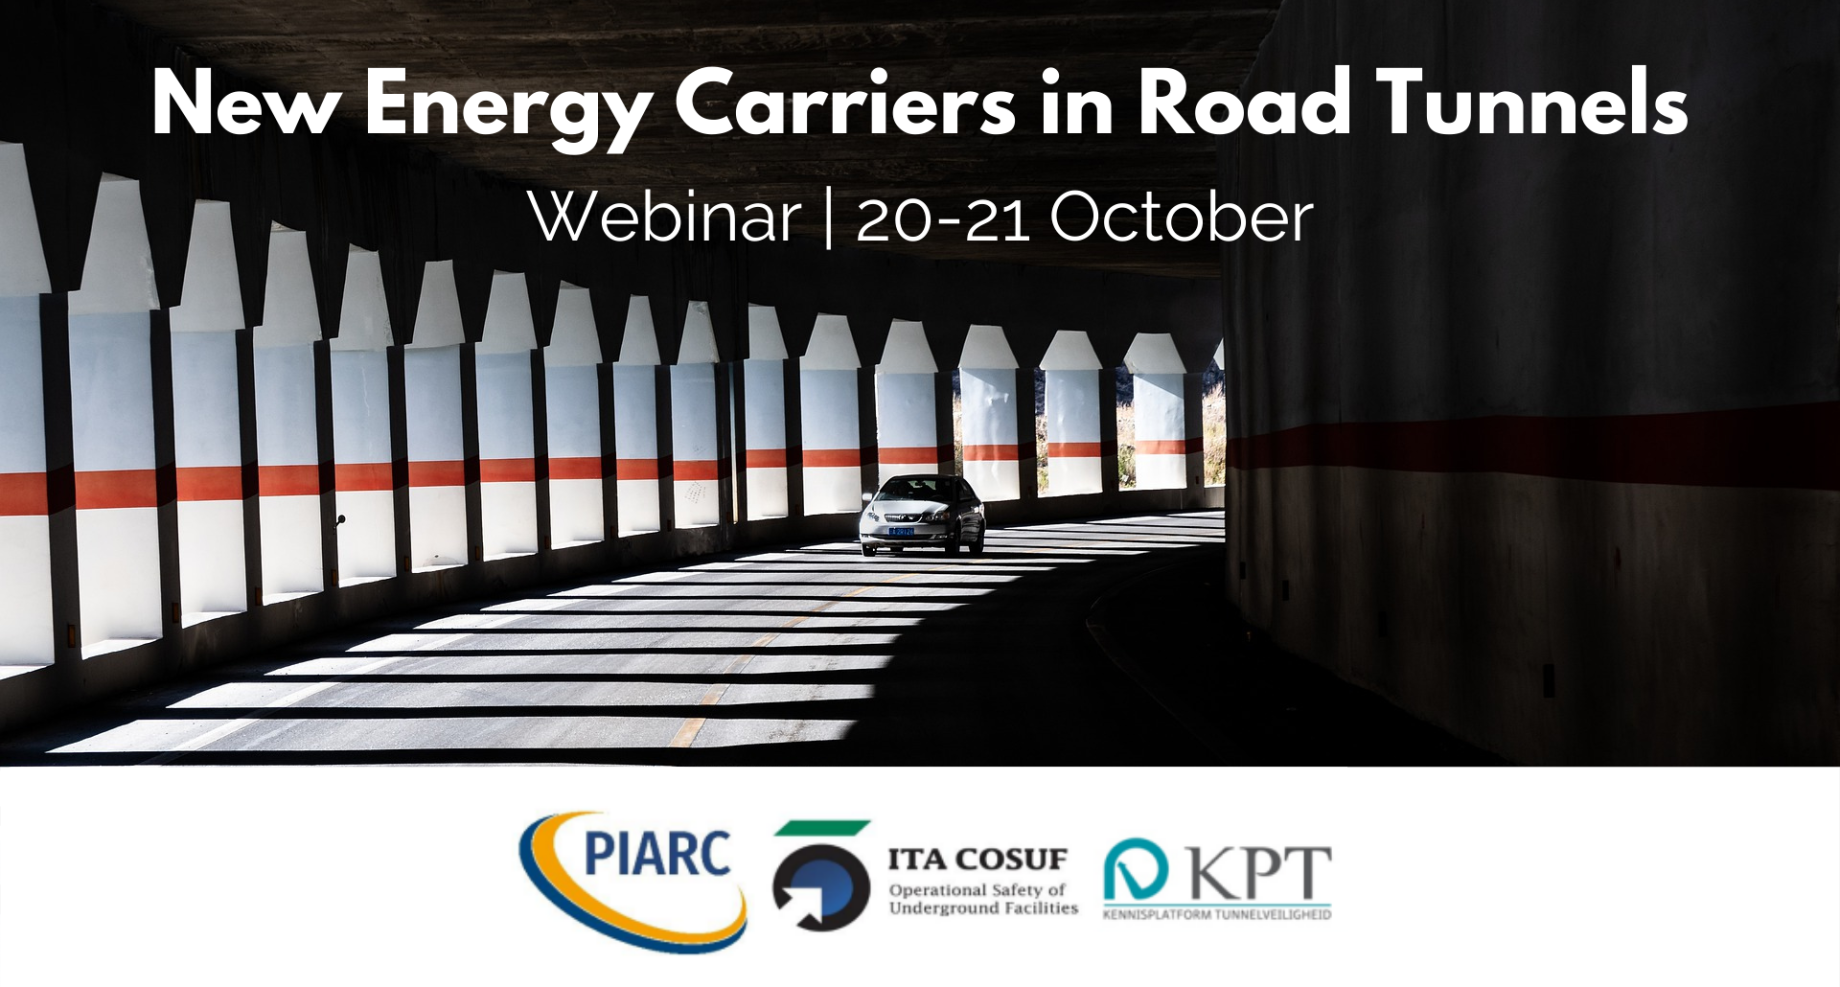 Safety of new energy vehicles in tunnels, the main focus of the webinar
organized by PIARC, ITA-COSUF and KPT